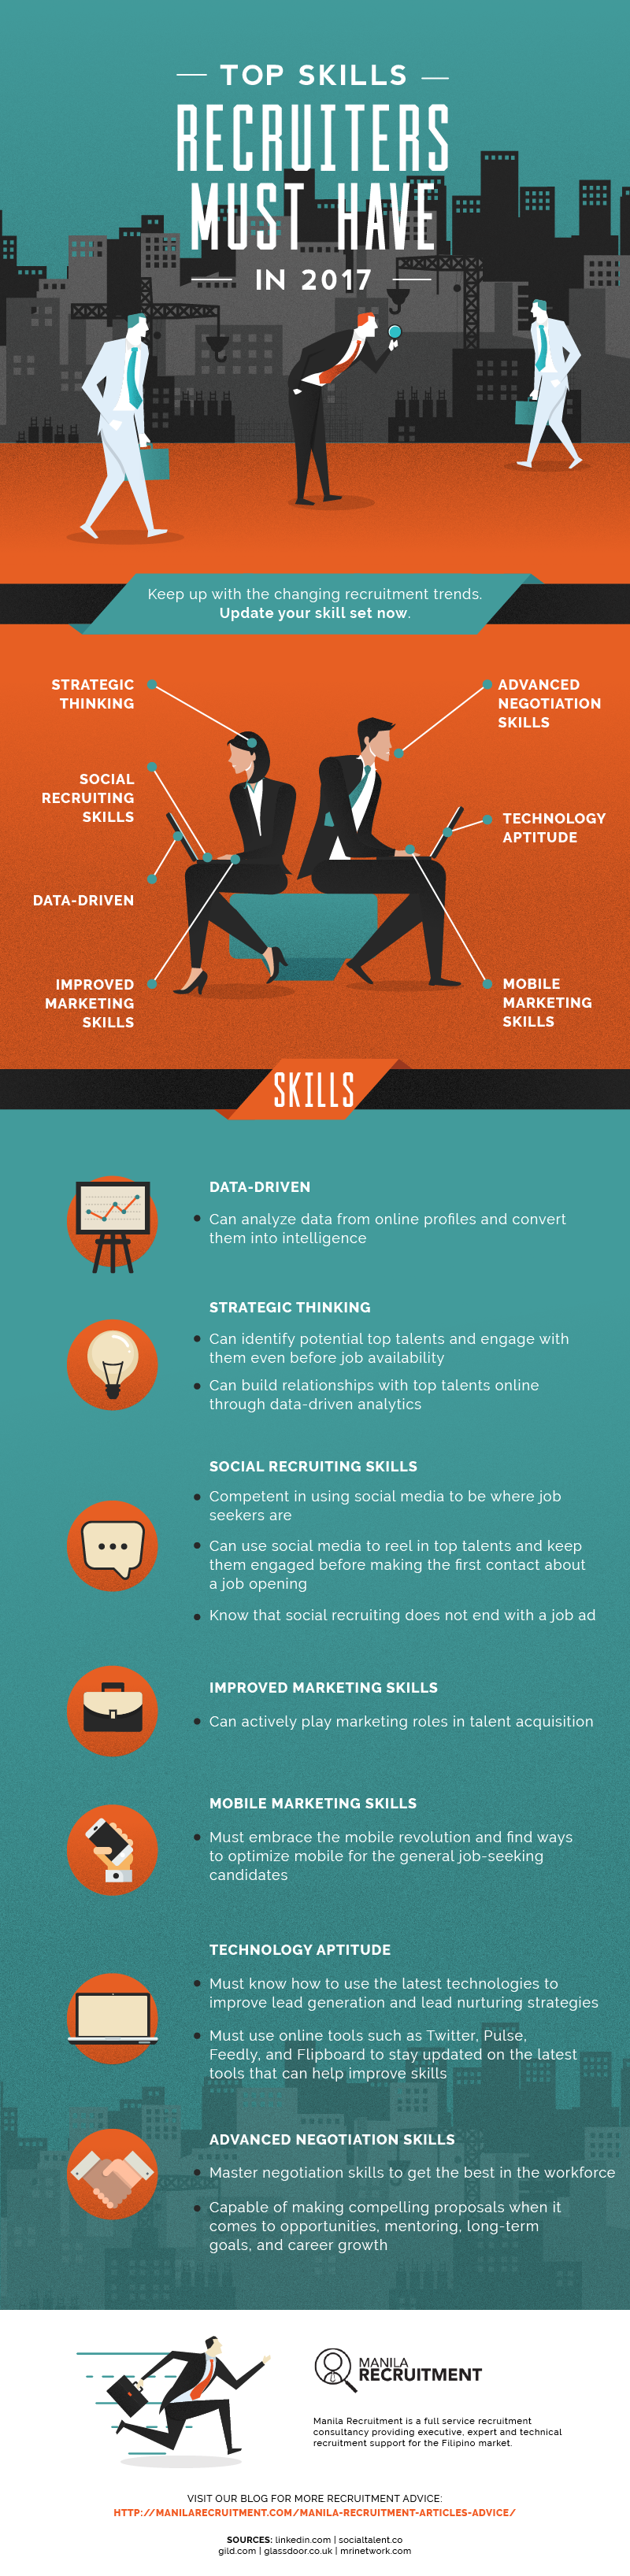 Top Skills Recruiters Must Have in 2017